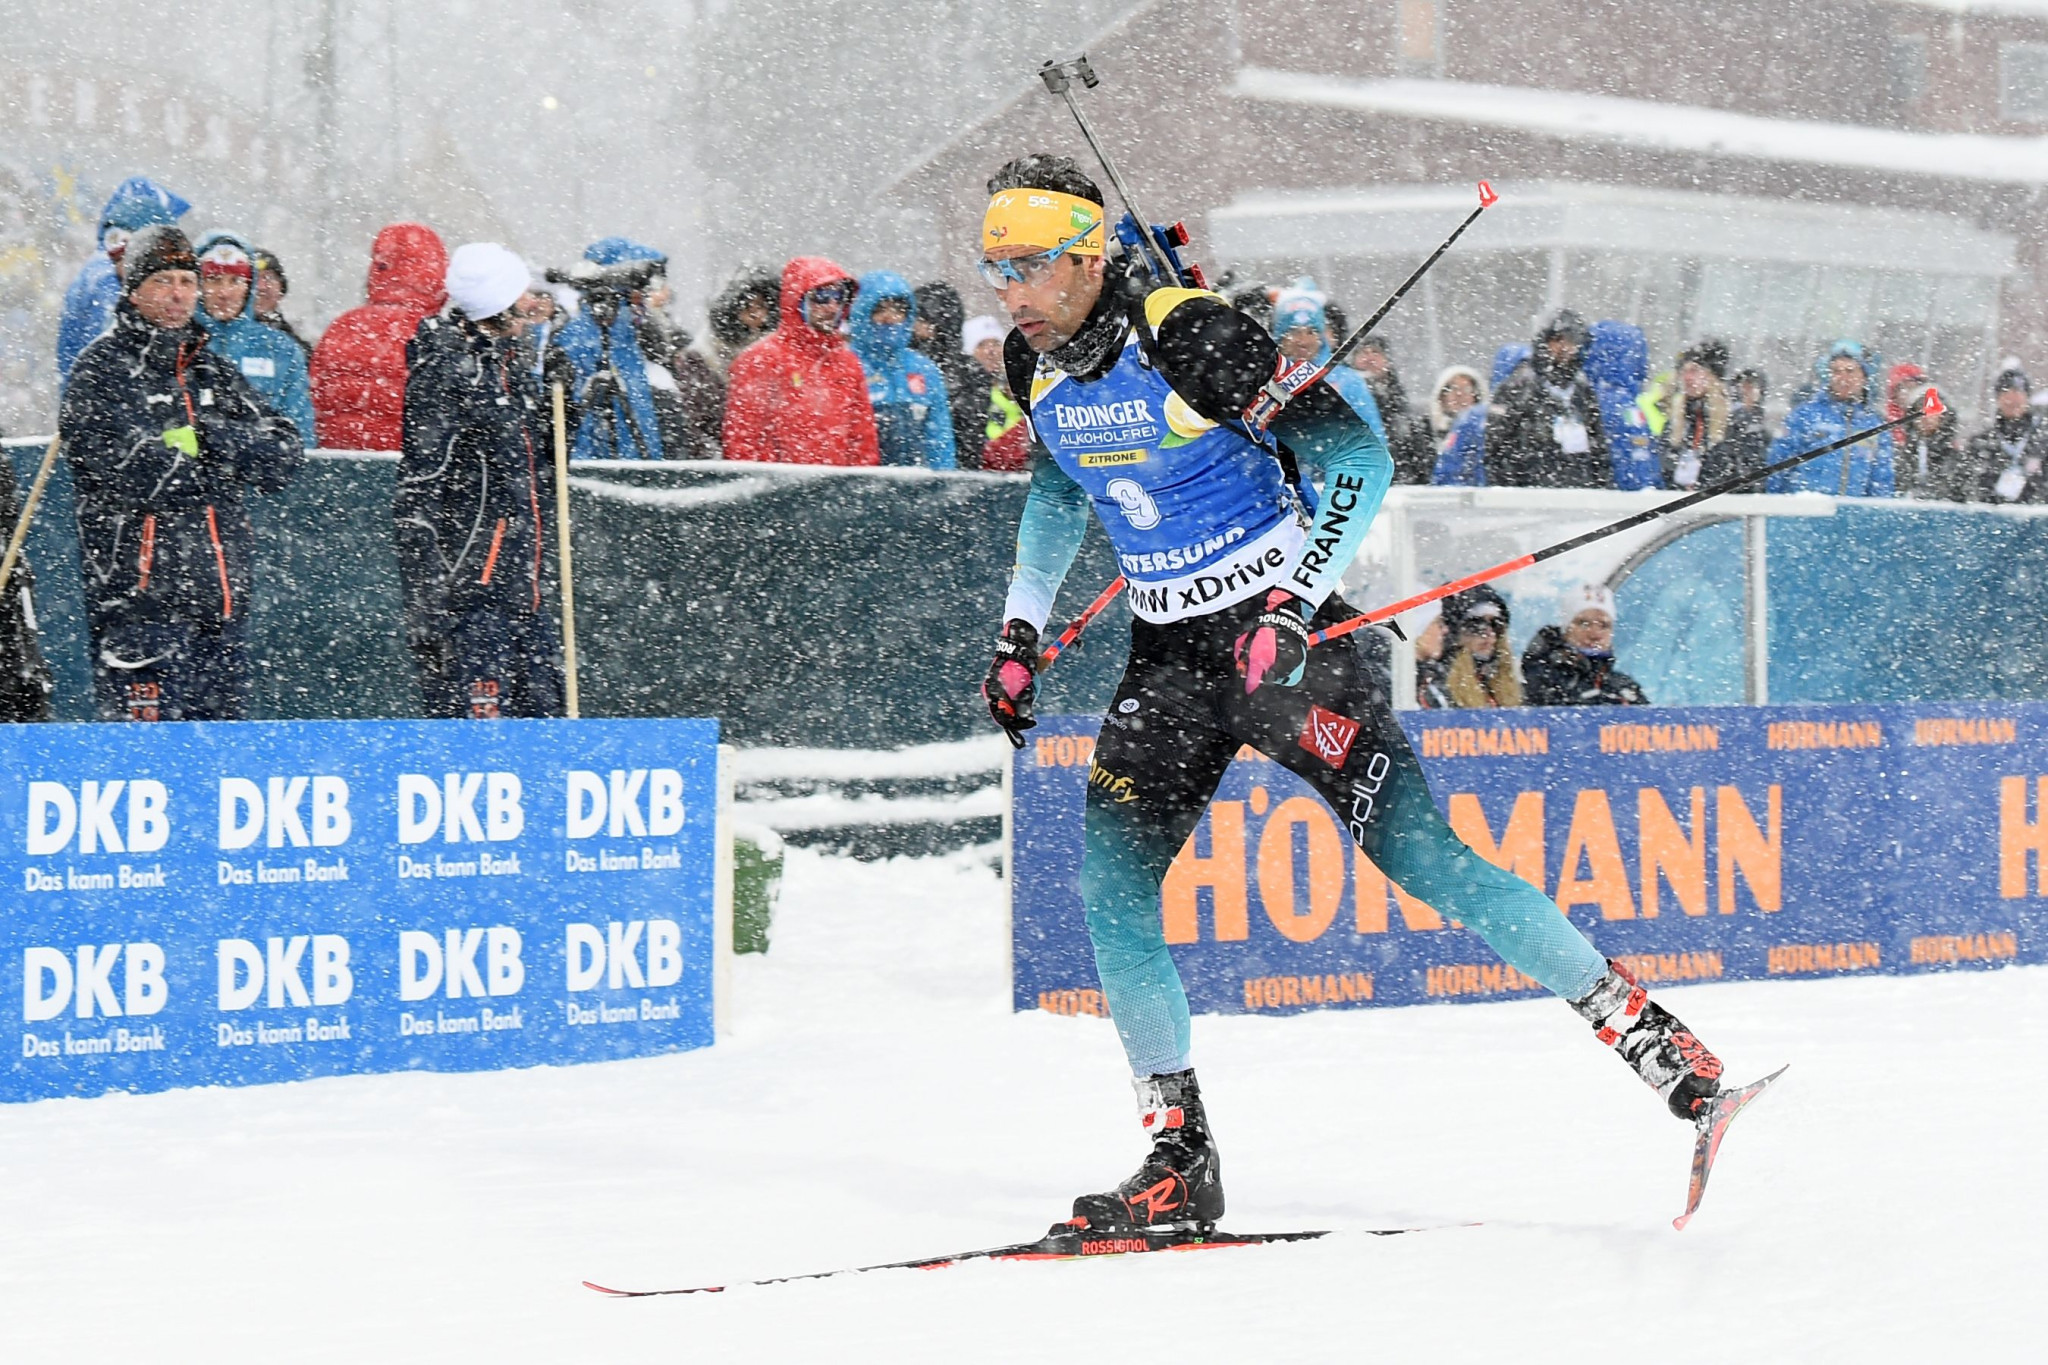 The festival is being organised by Martin Fourcade and ALYANSKI ©Getty Images